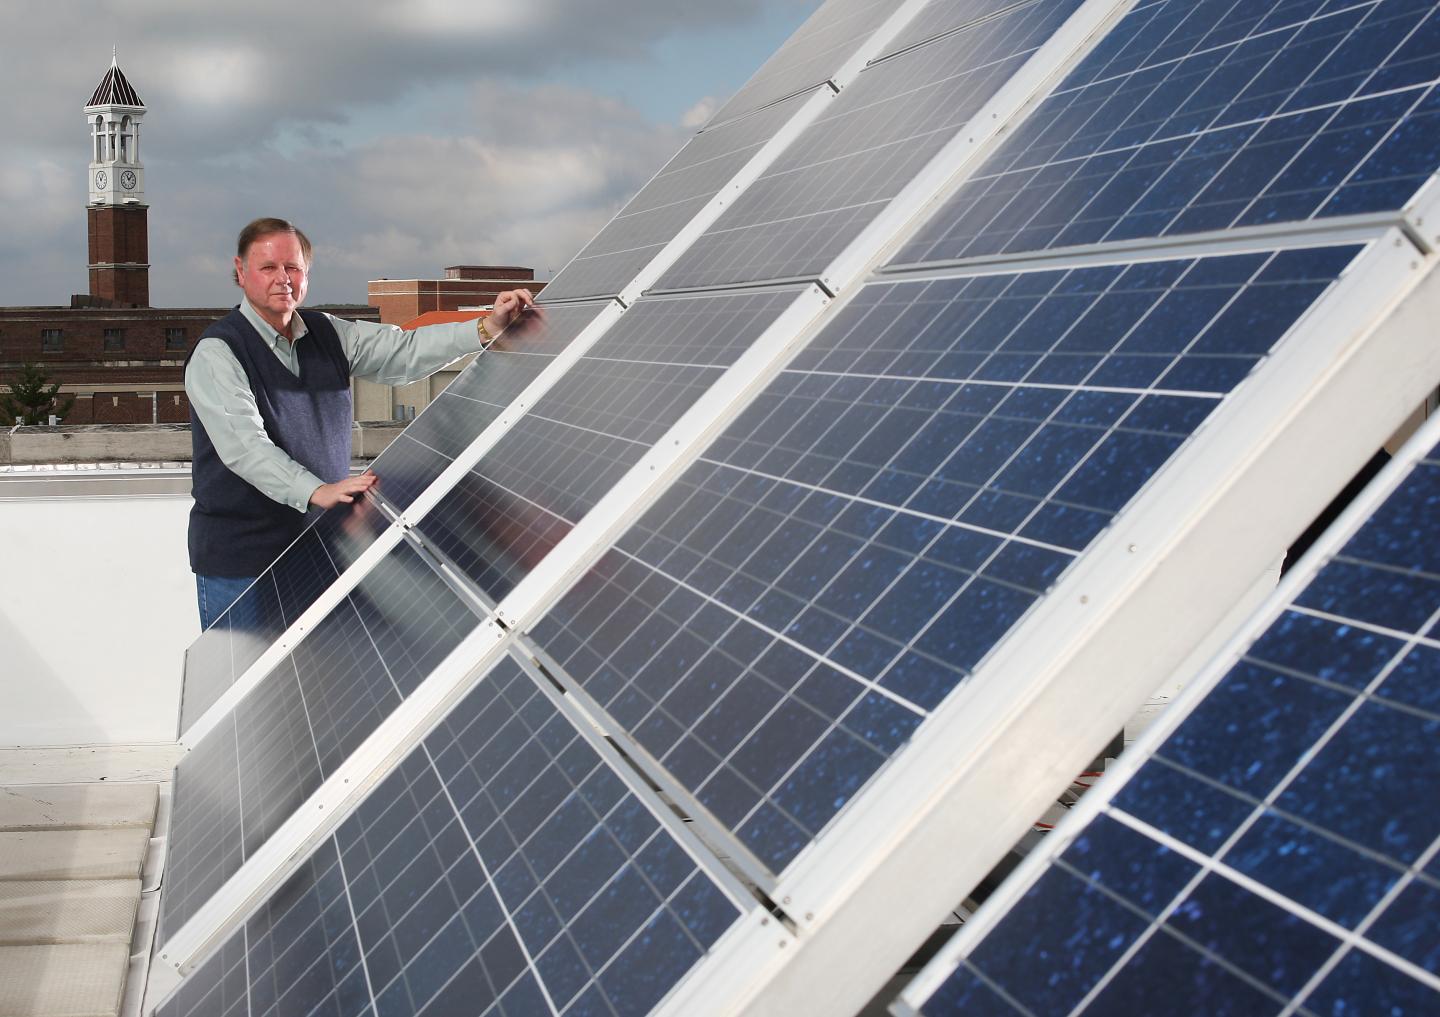 Solar Panels More Economical for Indiana Businesses Than Homes